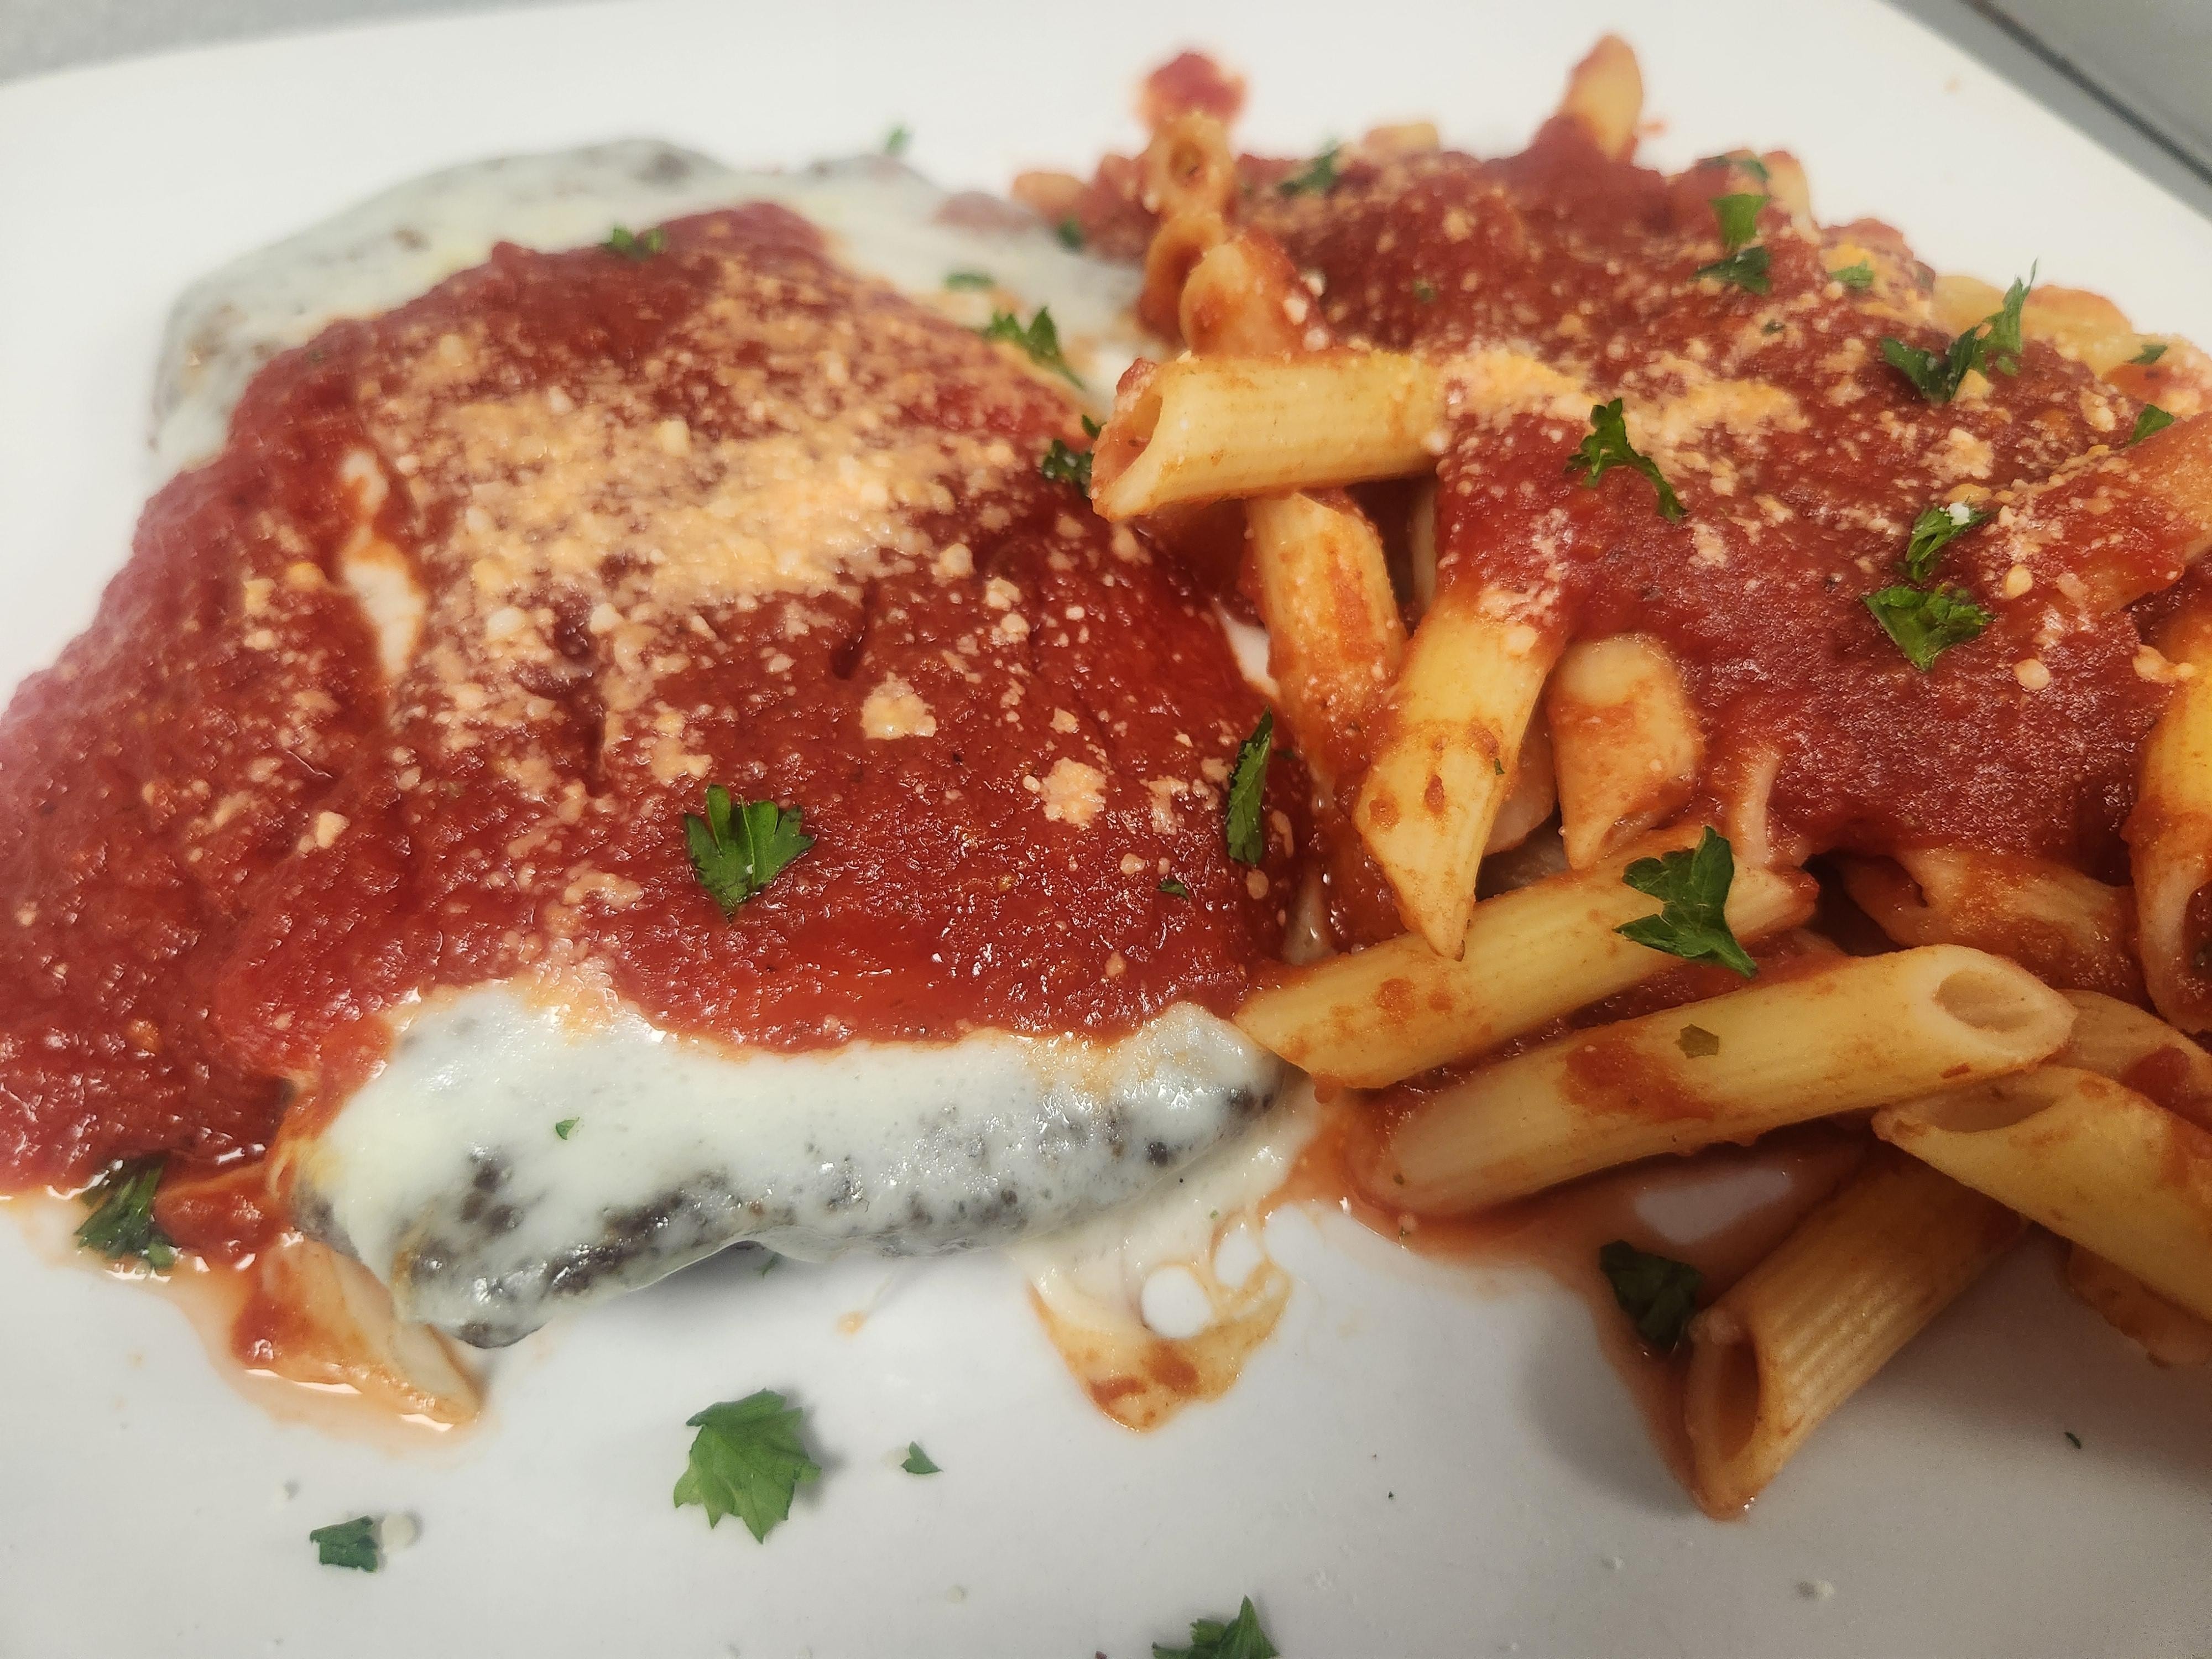 VEAL PARM